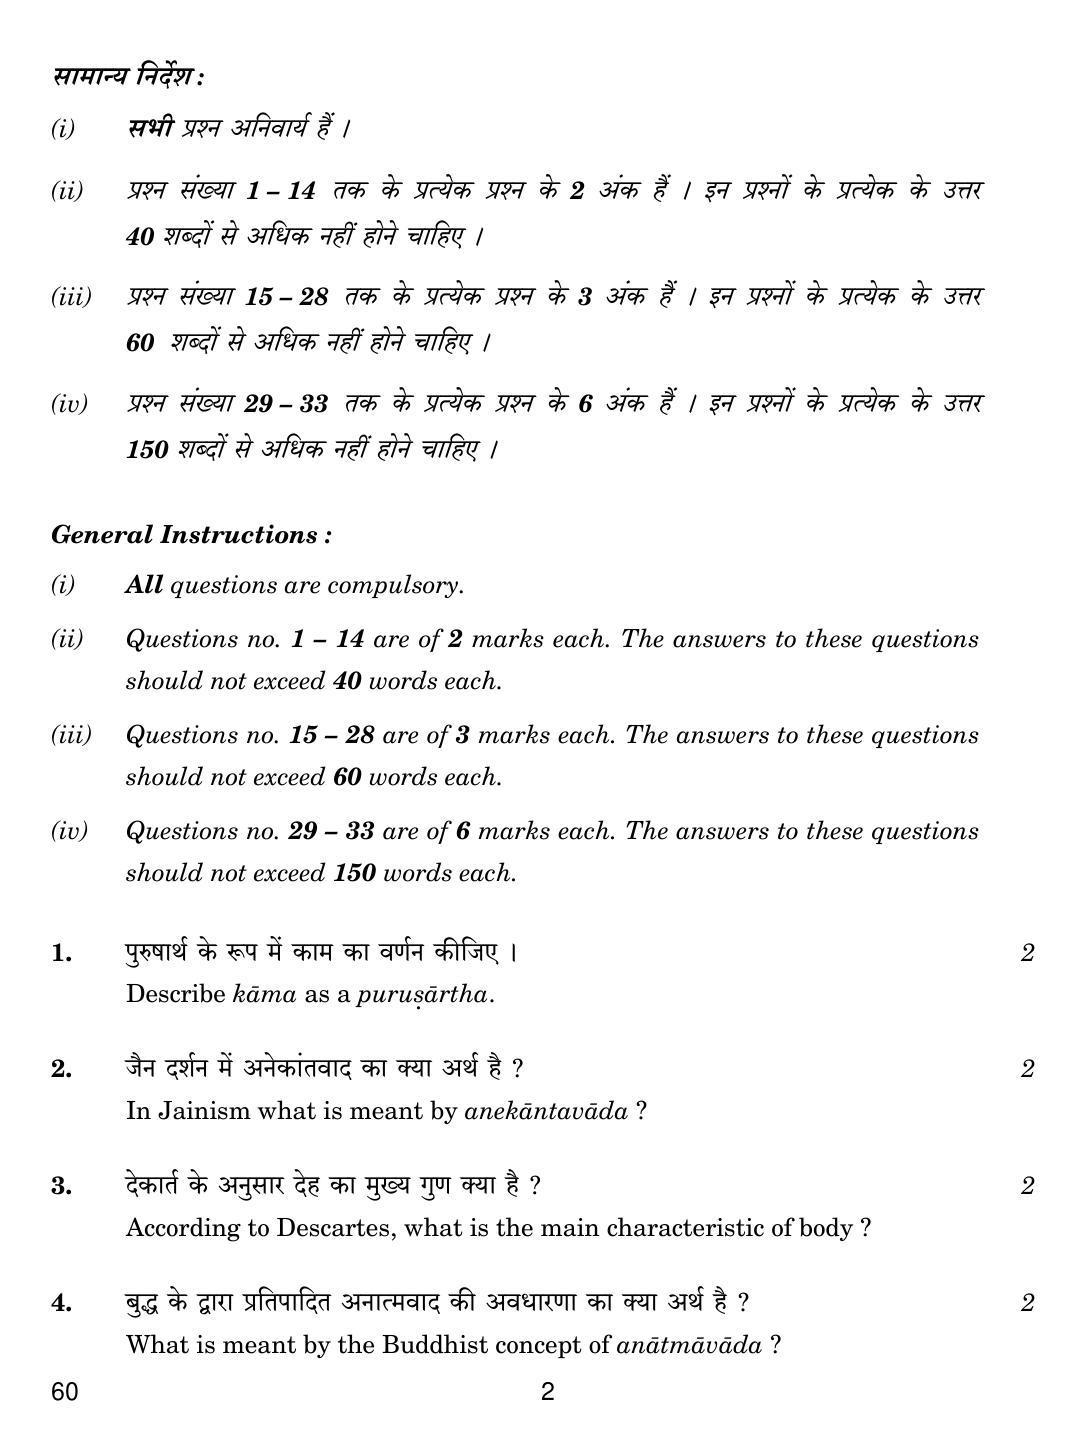 CBSE Class 12 60 PHILOSOPHY 2019 Compartment Question Paper - Page 2